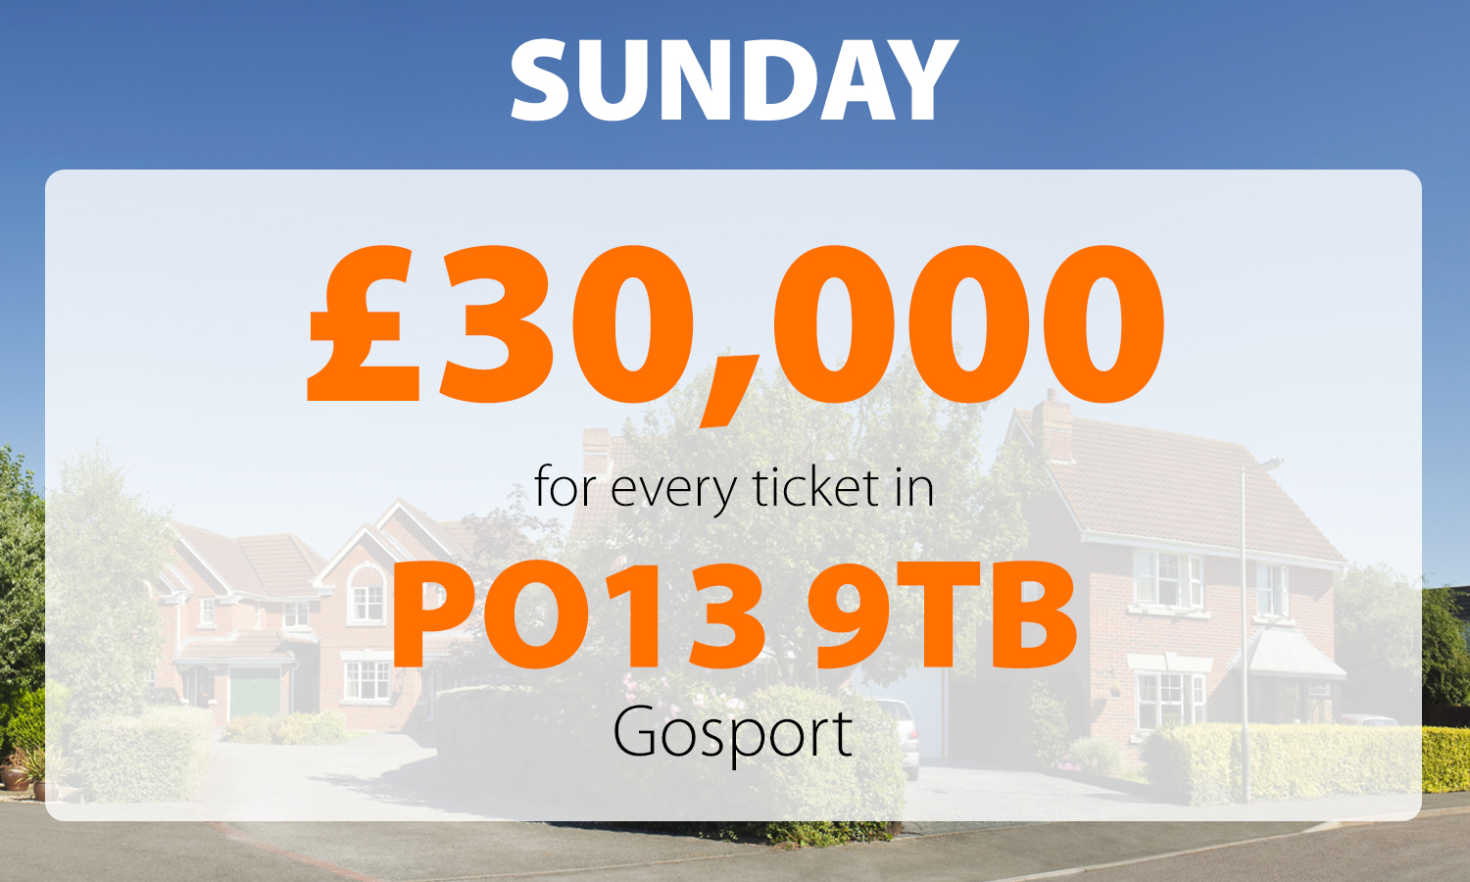 One very lucky Gosport player will be celebrating this weekend after winning a fantastic £30,000 prize